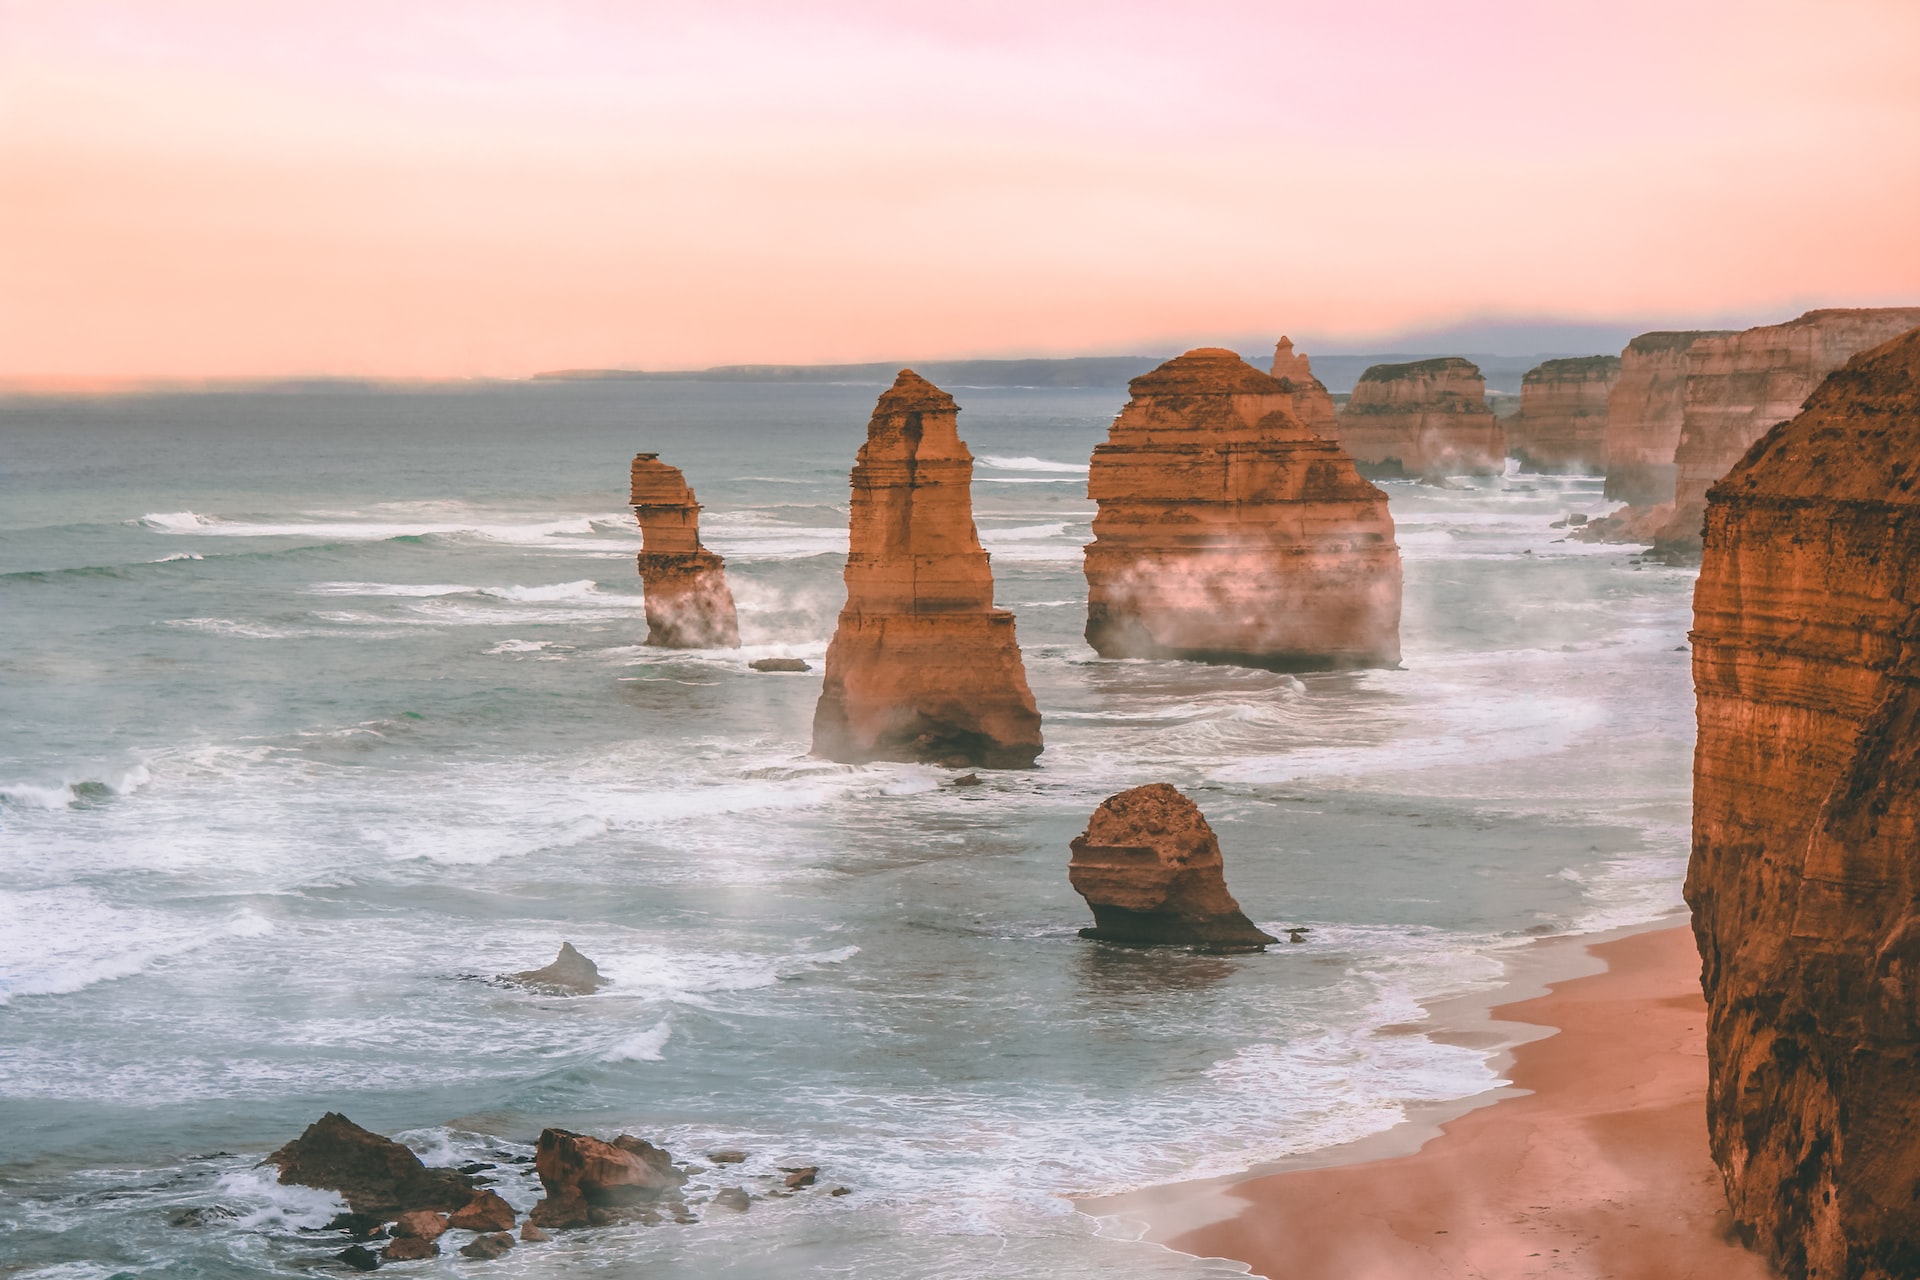 An image of the rocks known as the Twelve Apostles in Princetown, Australia, with waves crashing in the foreground.